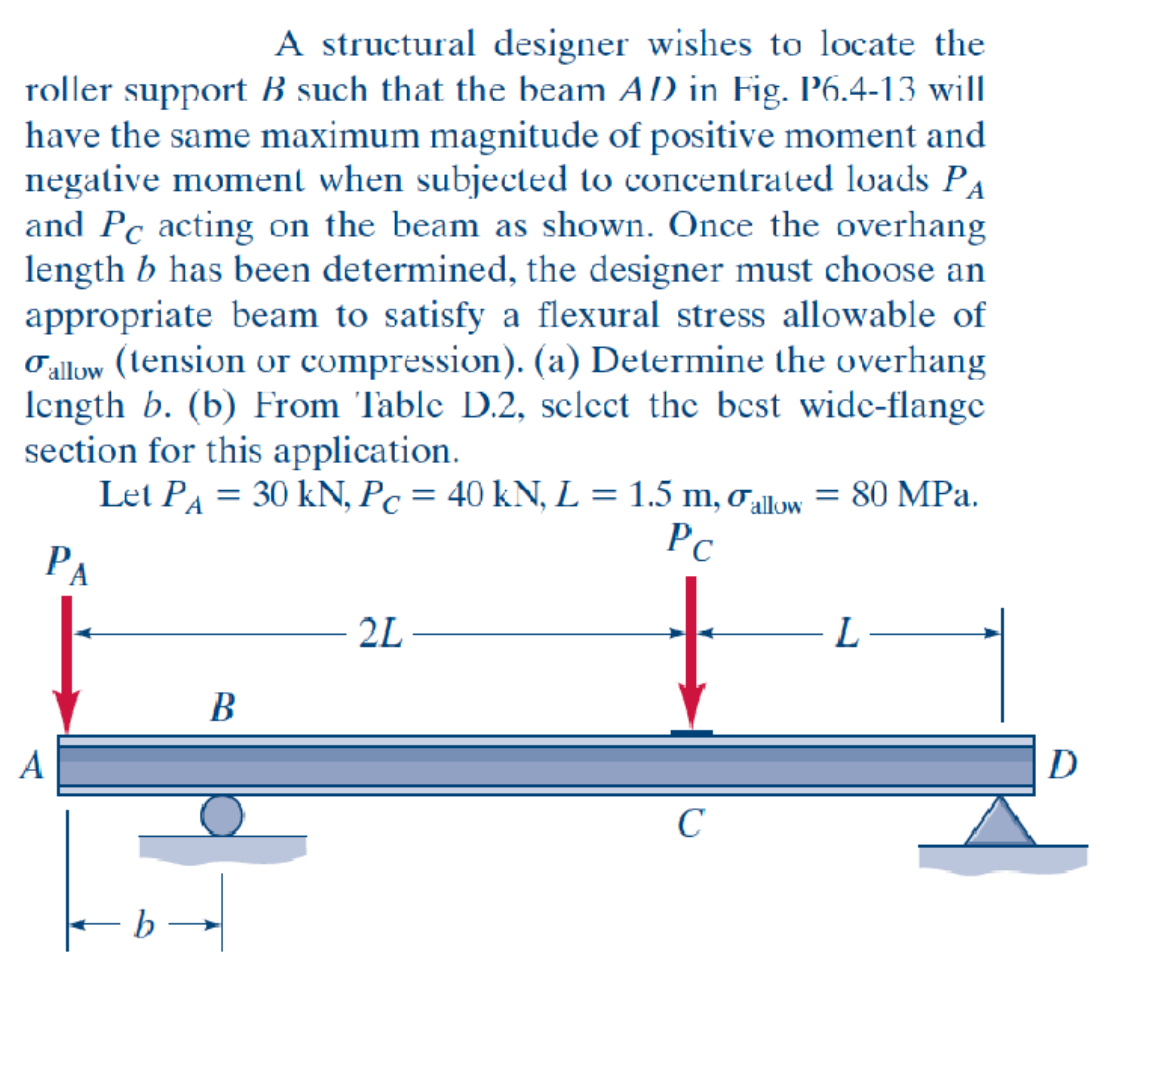 A structural designer wishes to locate the
roller support B such that the beam AD) in Fig. P6.4-13 will
have the same maximum magnitude of positive moment and
negative moment when subjected to concentrated loads PA
and PC acting on the beam as shown. Once the overhang
length b has been determined, the designer must choose an
appropriate beam to satisfy a flexural stress allowable of
Fallow (tension or compression). (a) Determine the overhang
length b. (b) From Table D.2, select the best wide-flange
section for this application.
Let PA = 30 kN, Pc = 40 kN, L = 1.5 m, allow = 80 MPa.
Pc
PA
A
B
2L
с
L-
D